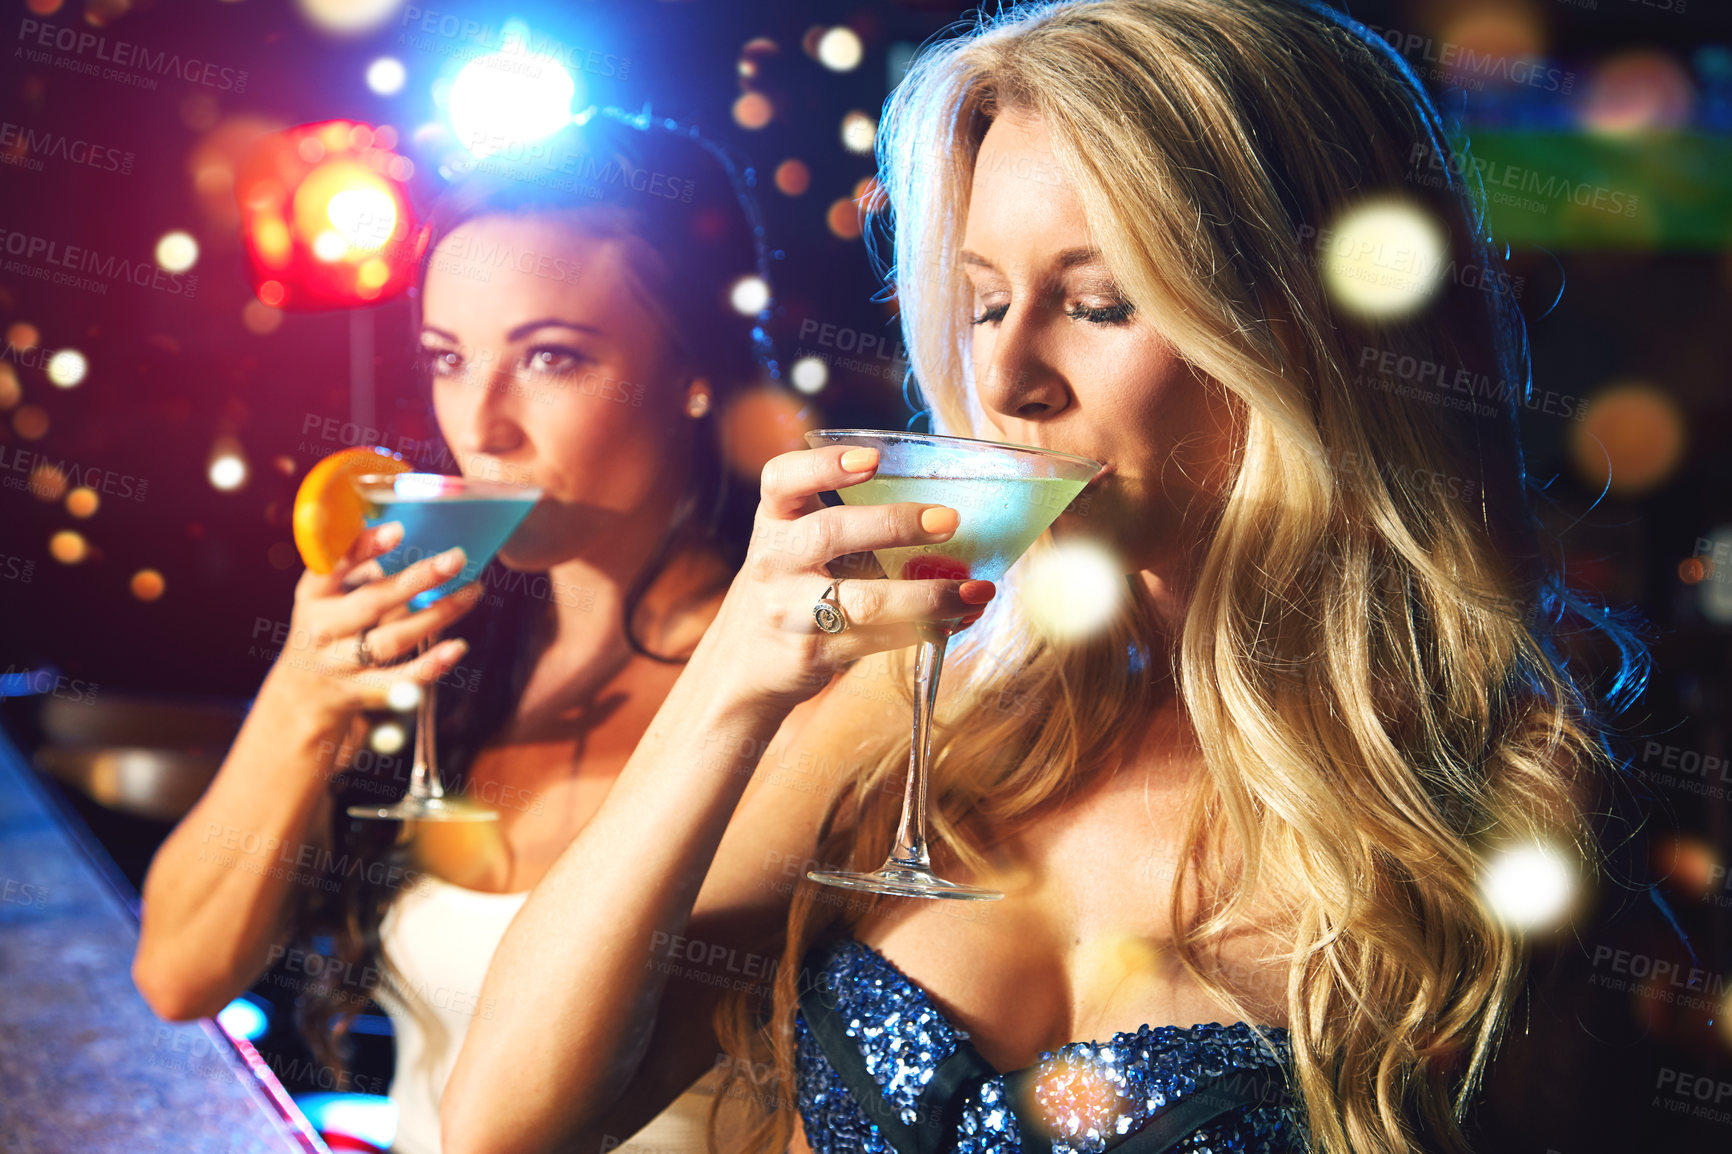 Buy stock photo Women, cocktail and drink at party or nightclub, celebrate new year with alcohol drinks, friends and drinking together. Celebration, fun at happy hour with social and holiday event with cocktails.